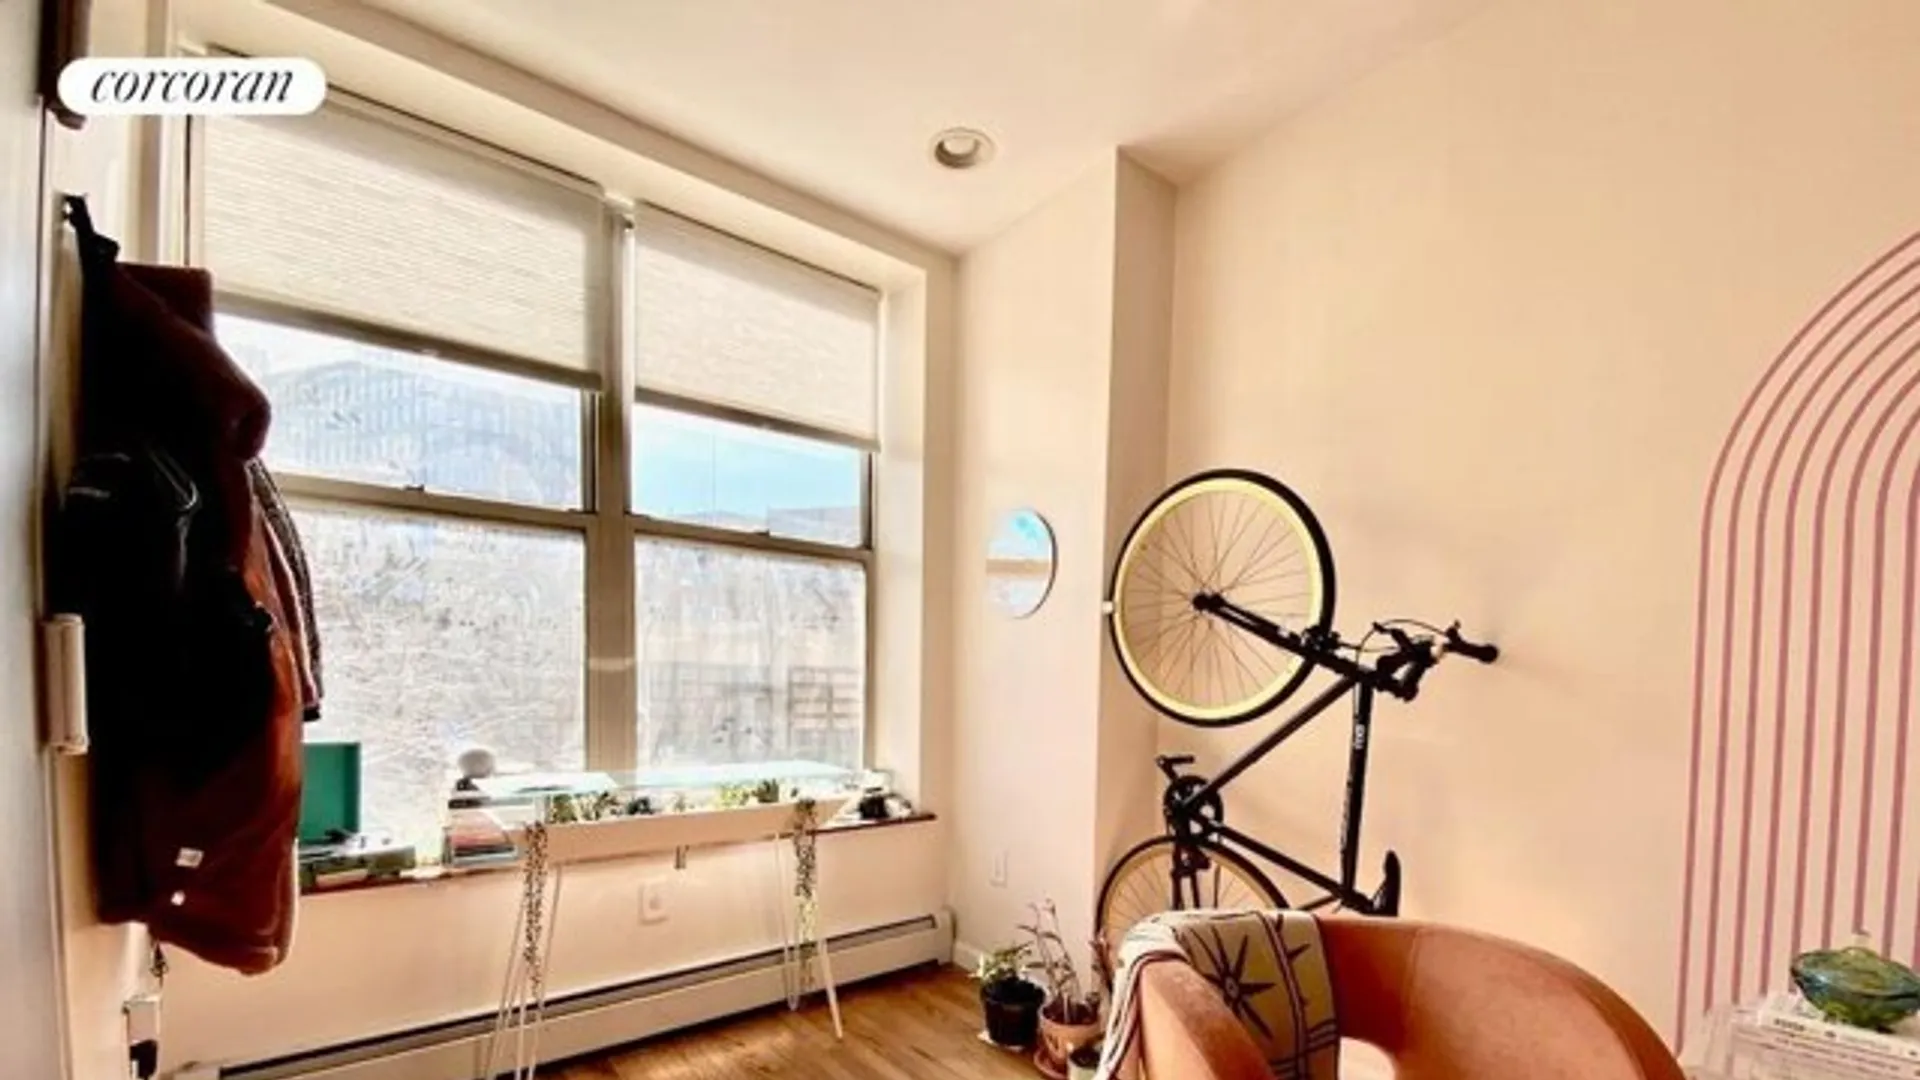 305 West 123rd Street, New York, NY 10027, USA | 1 bed apartment for rent